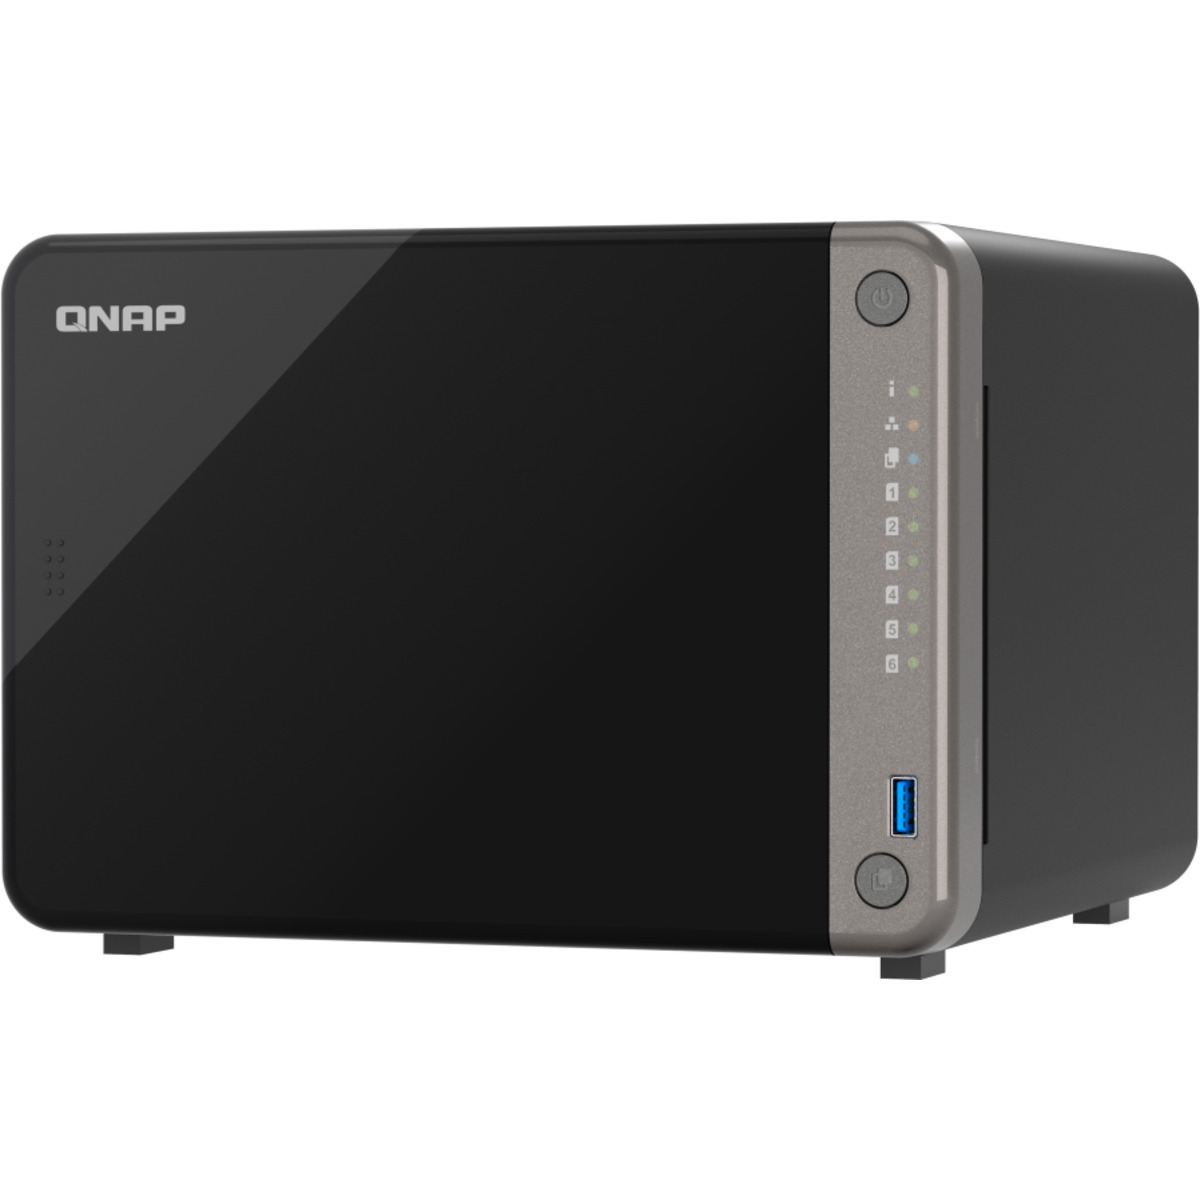 QNAP TS-AI642 80tb 6-Bay Desktop Multimedia / Power User / Business NAS - Network Attached Storage Device 4x20tb Western Digital Red Pro WD201KFGX 3.5 7200rpm SATA 6Gb/s HDD NAS Class Drives Installed - Burn-In Tested TS-AI642